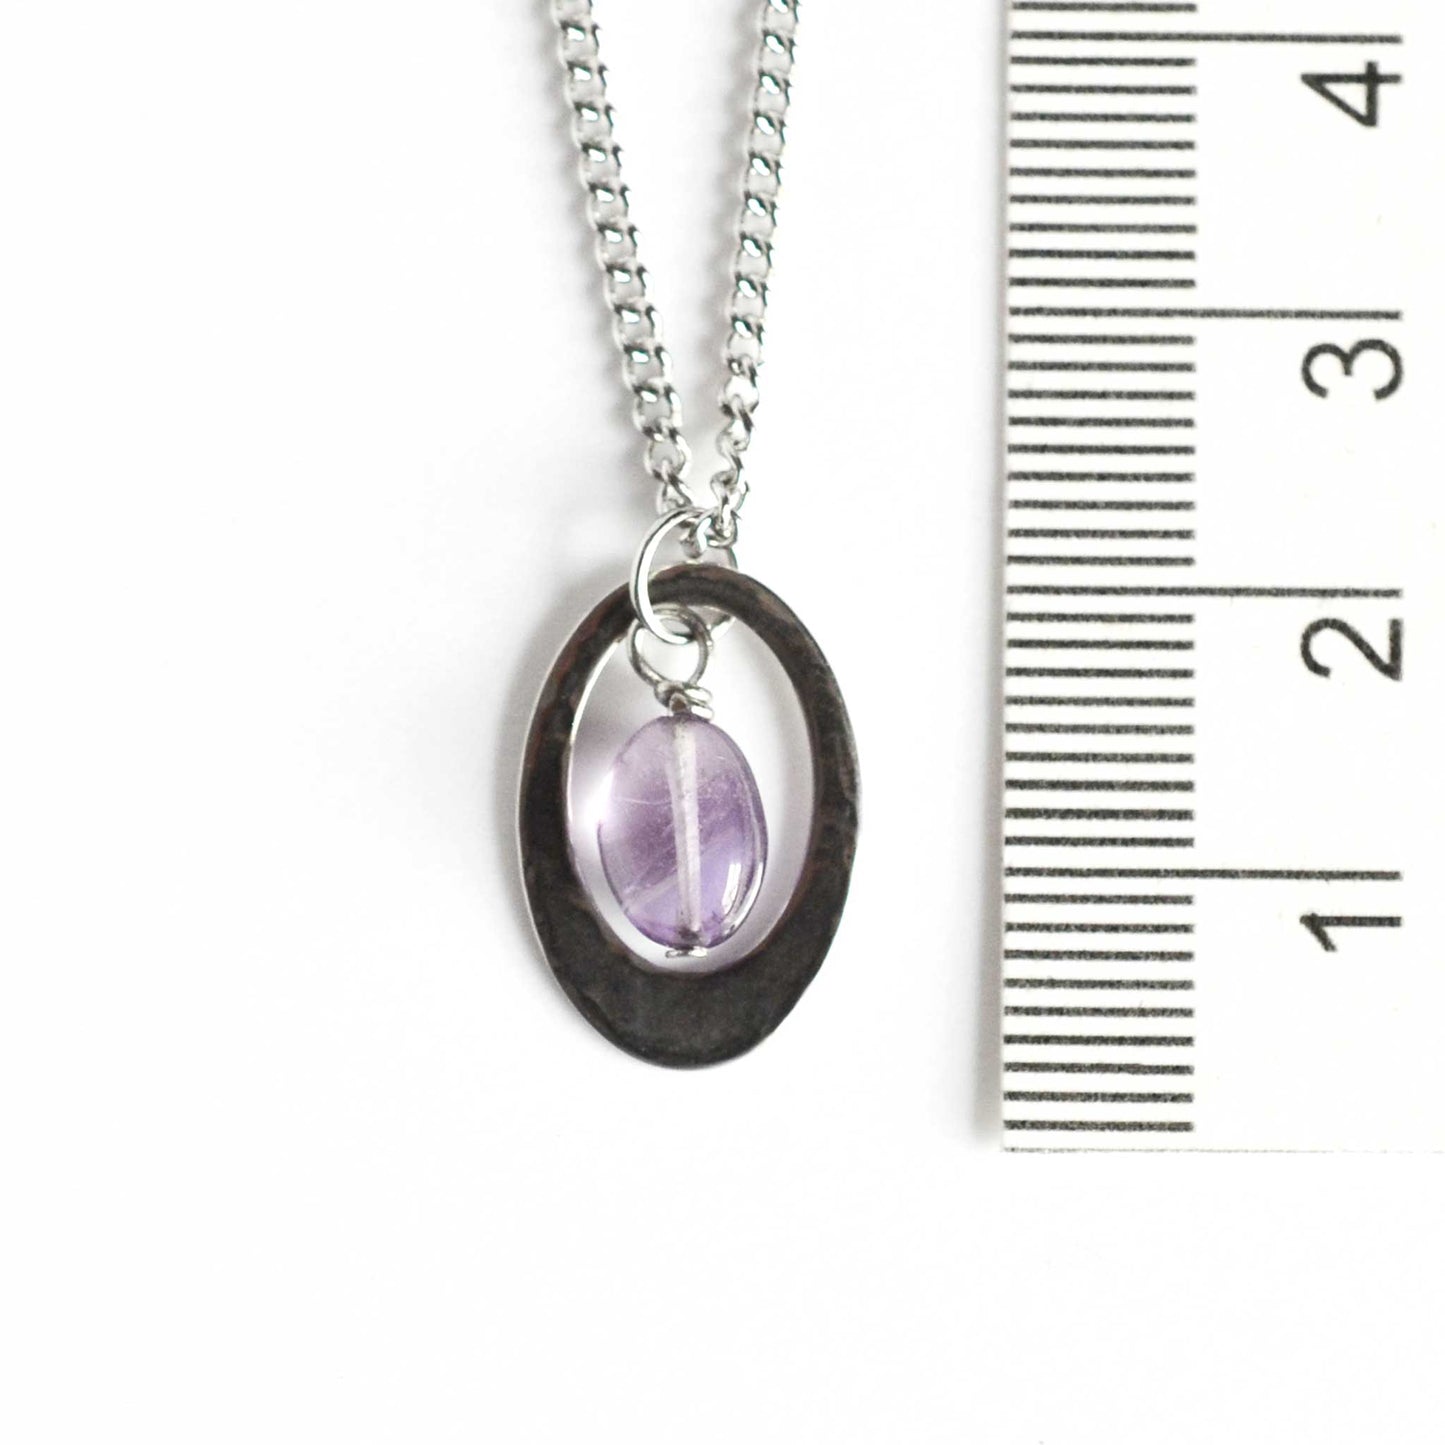 Dainty oval Amethyst pendant necklace next to ruler.